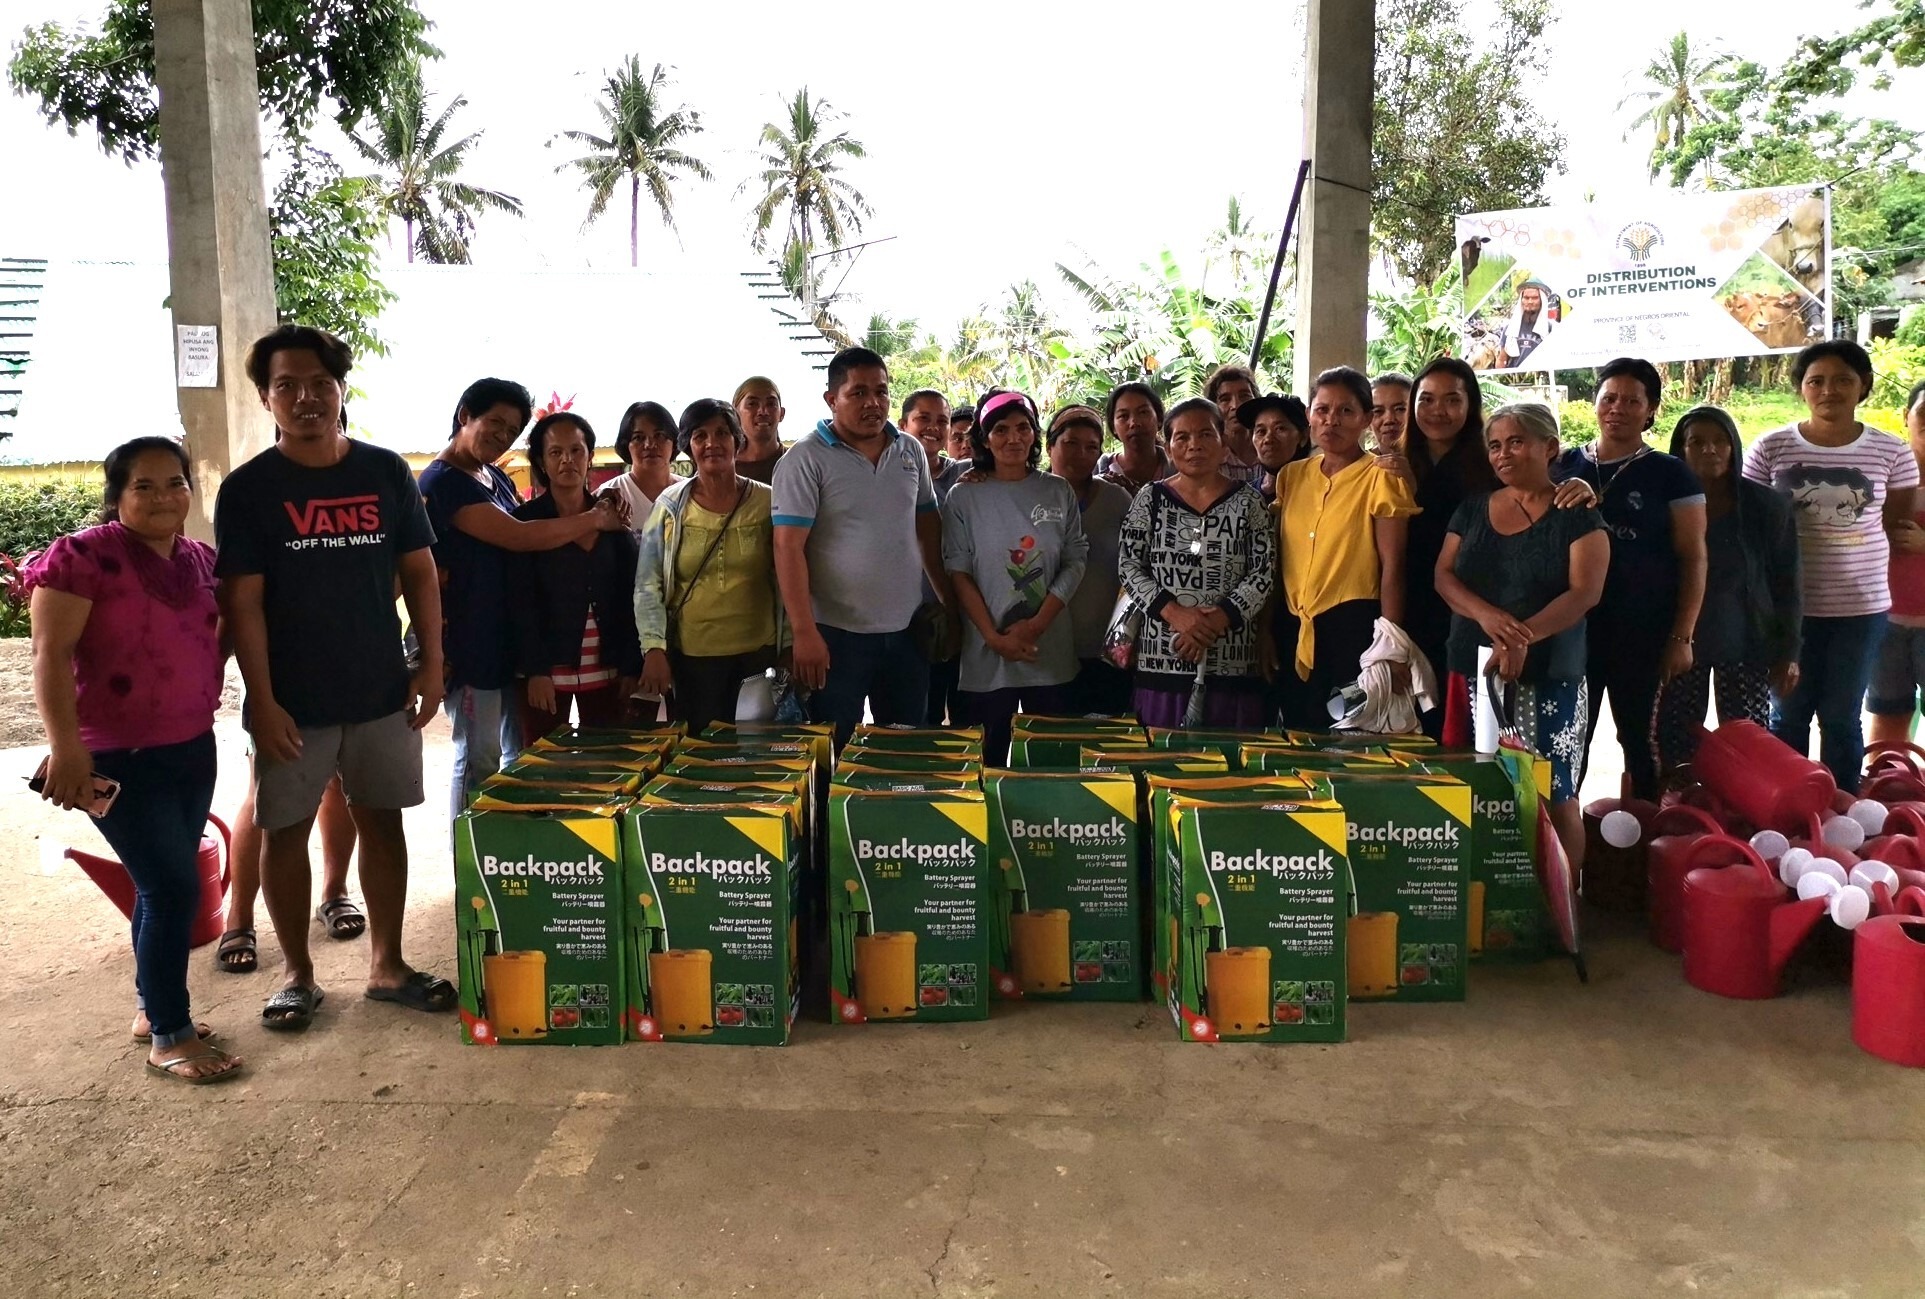 50 farmers implement the integrated corn, livestock project in Negros Oriental